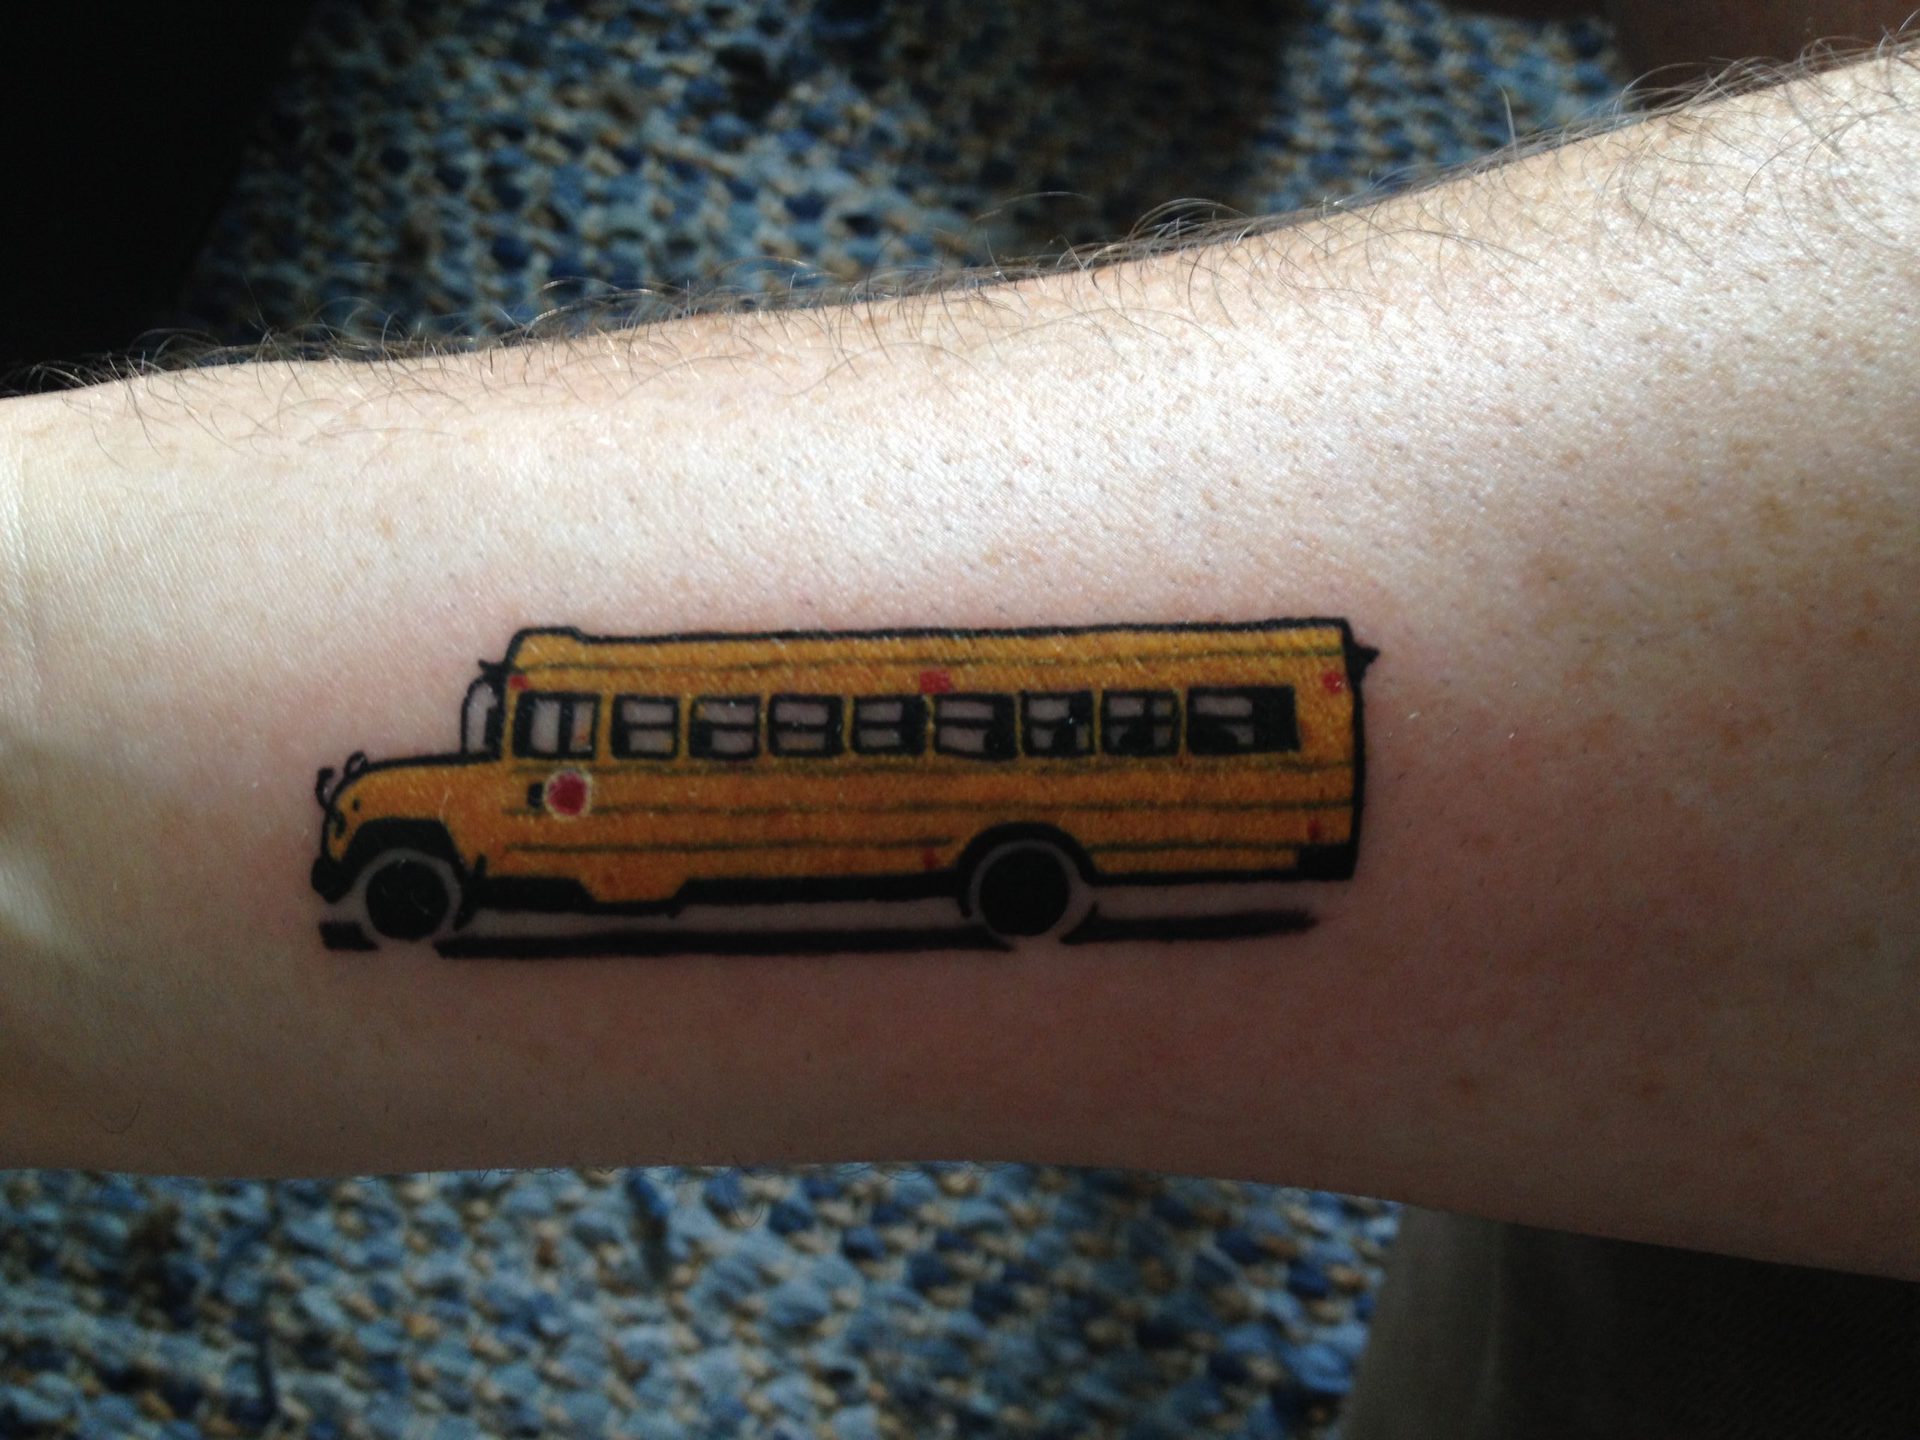 Magic bus tattoo on my arm. : r/IntotheWild